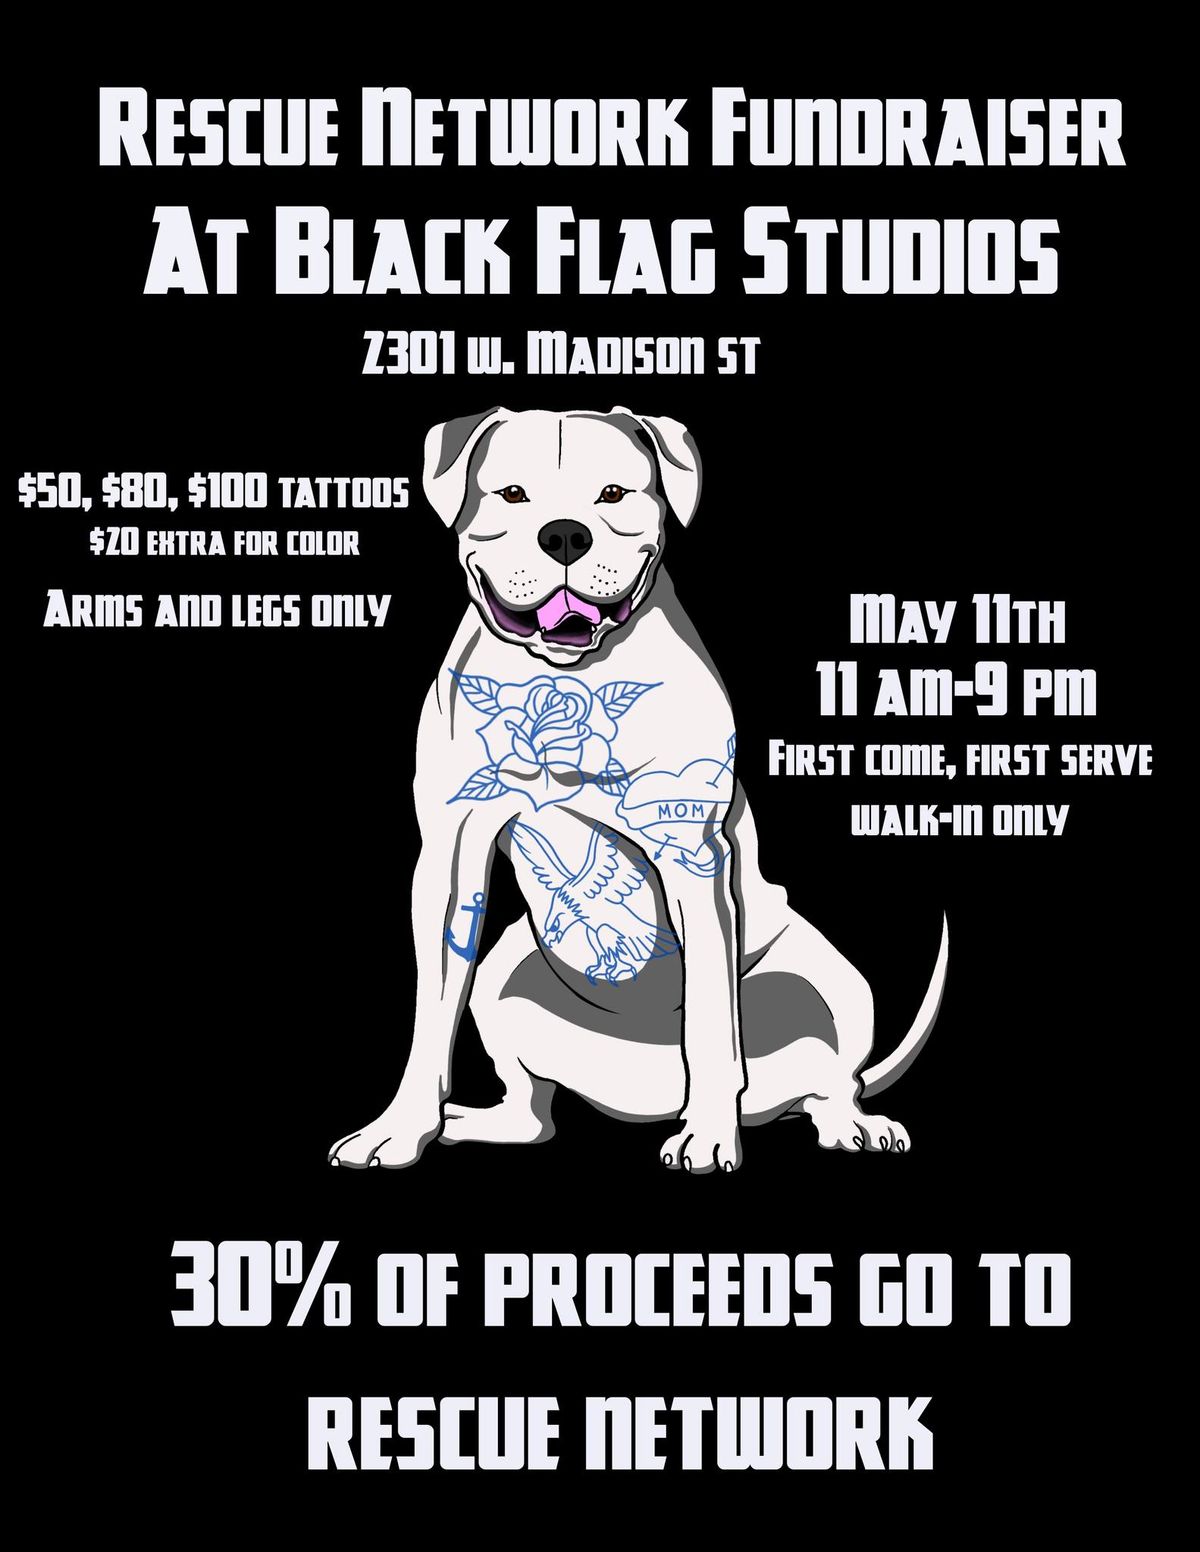 Tattoo Fundraiser for Rescue Network at Black Flag Studios!